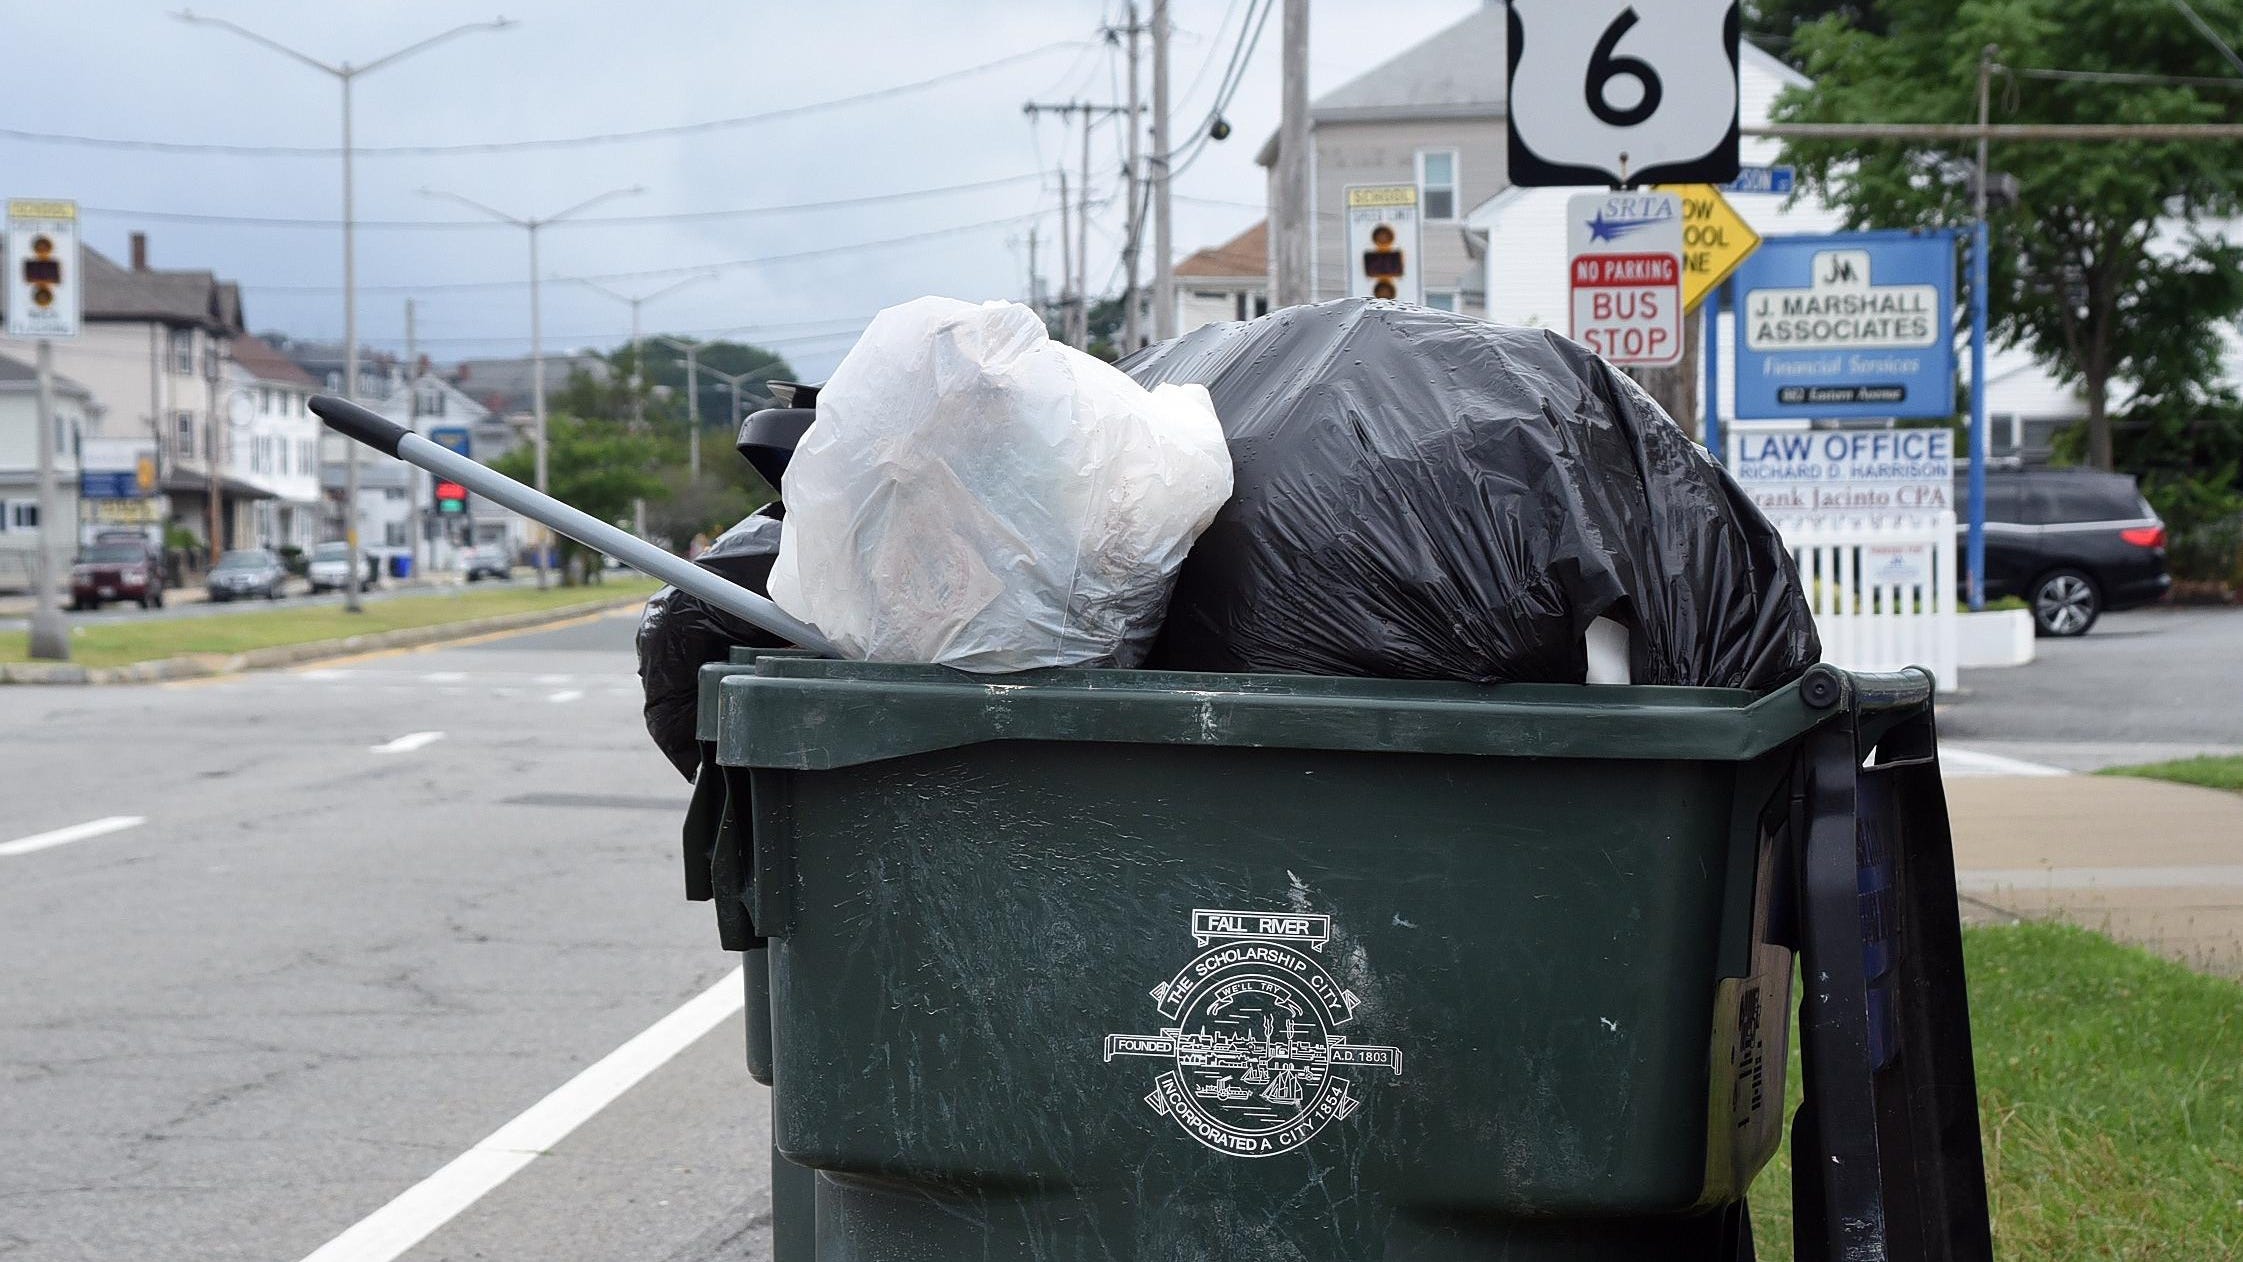 Trash pickup amnesty for Christmas announced for Fall River, Somerset